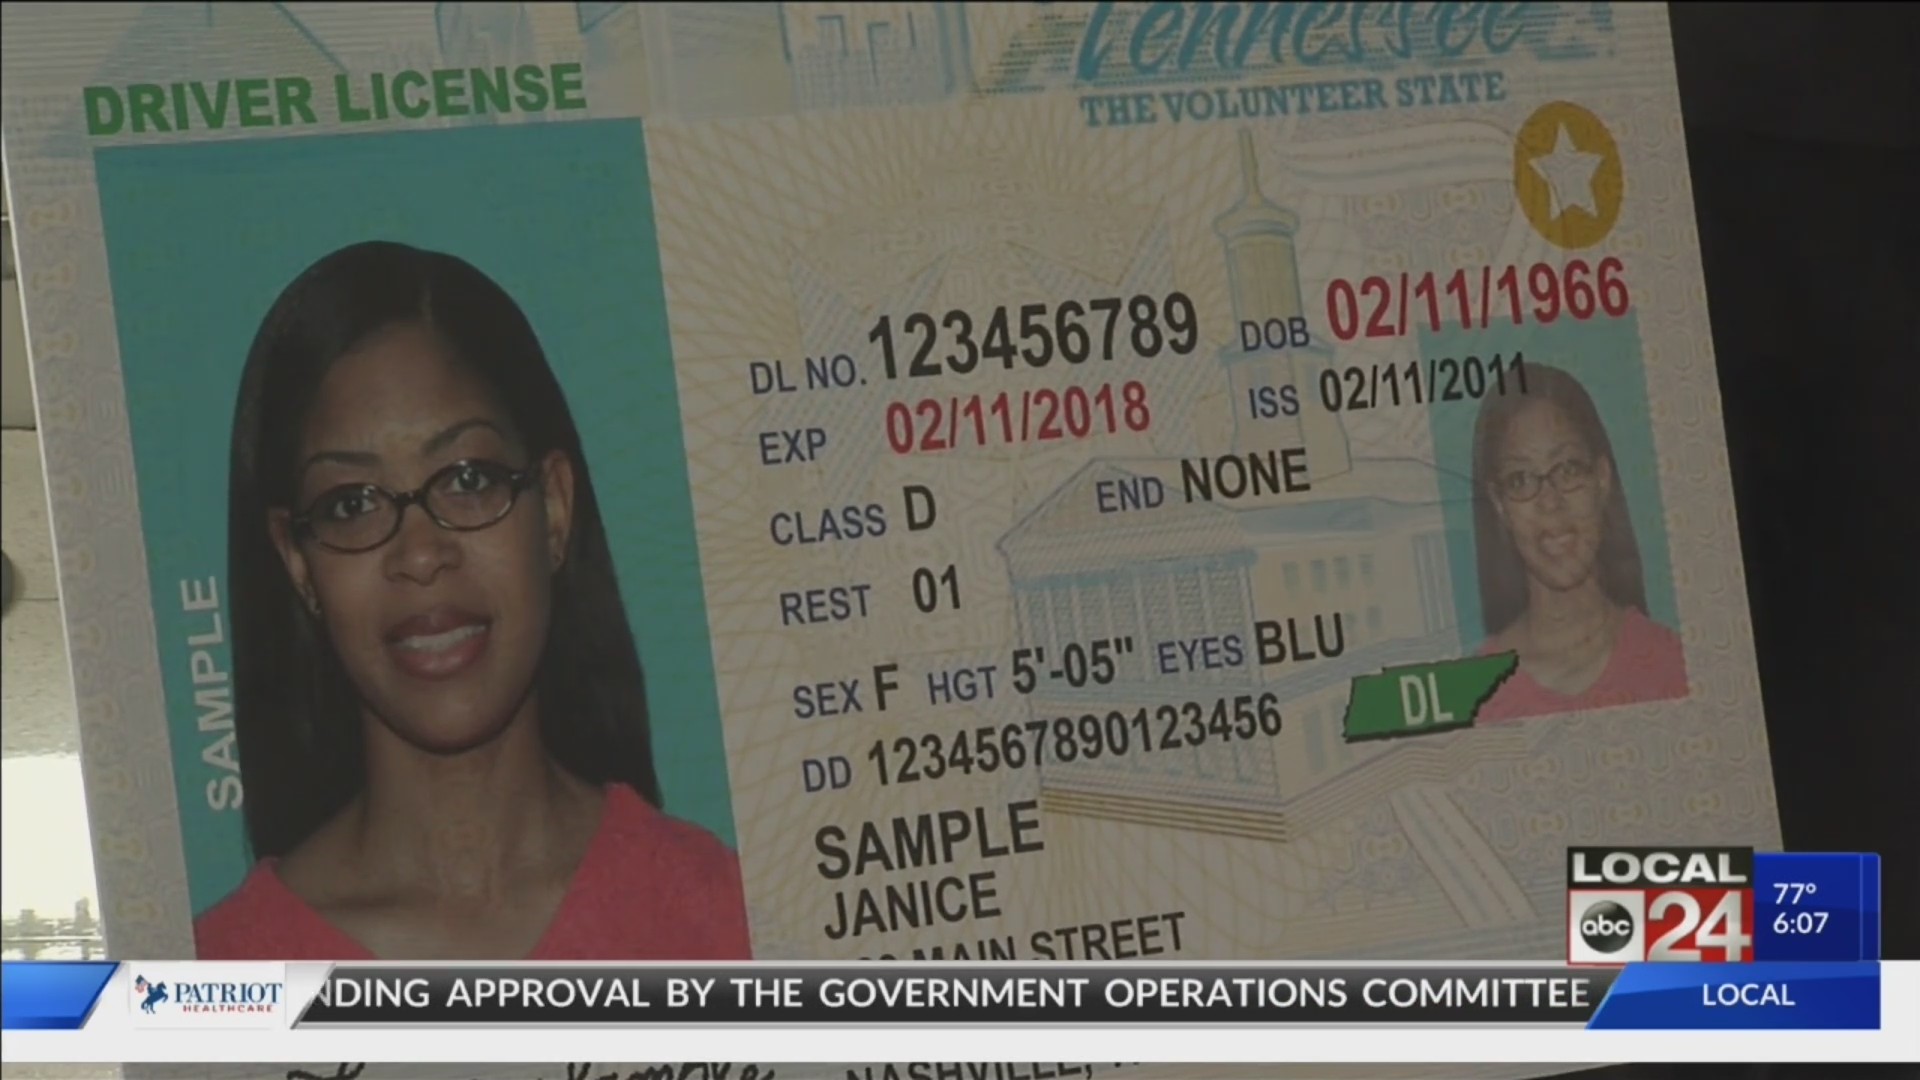 missouri new drivers license for travel